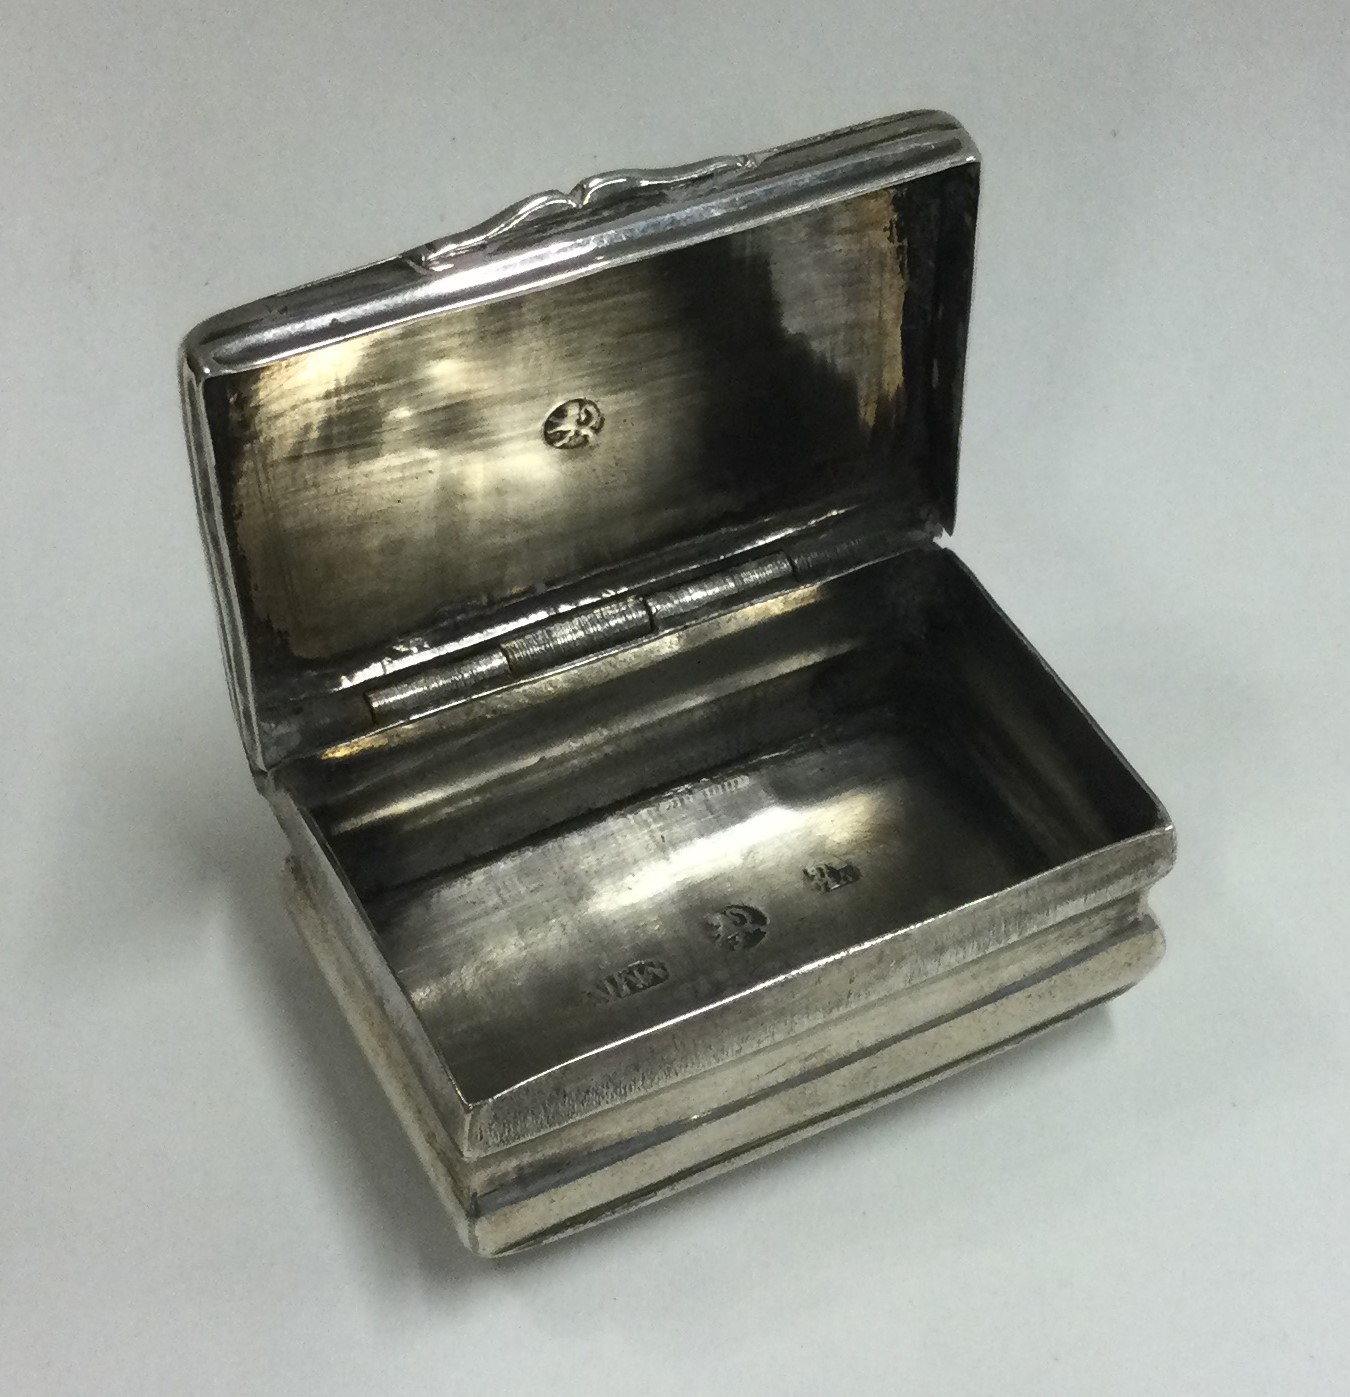 AUGSBURG: An early German silver hinged box. - Image 2 of 2